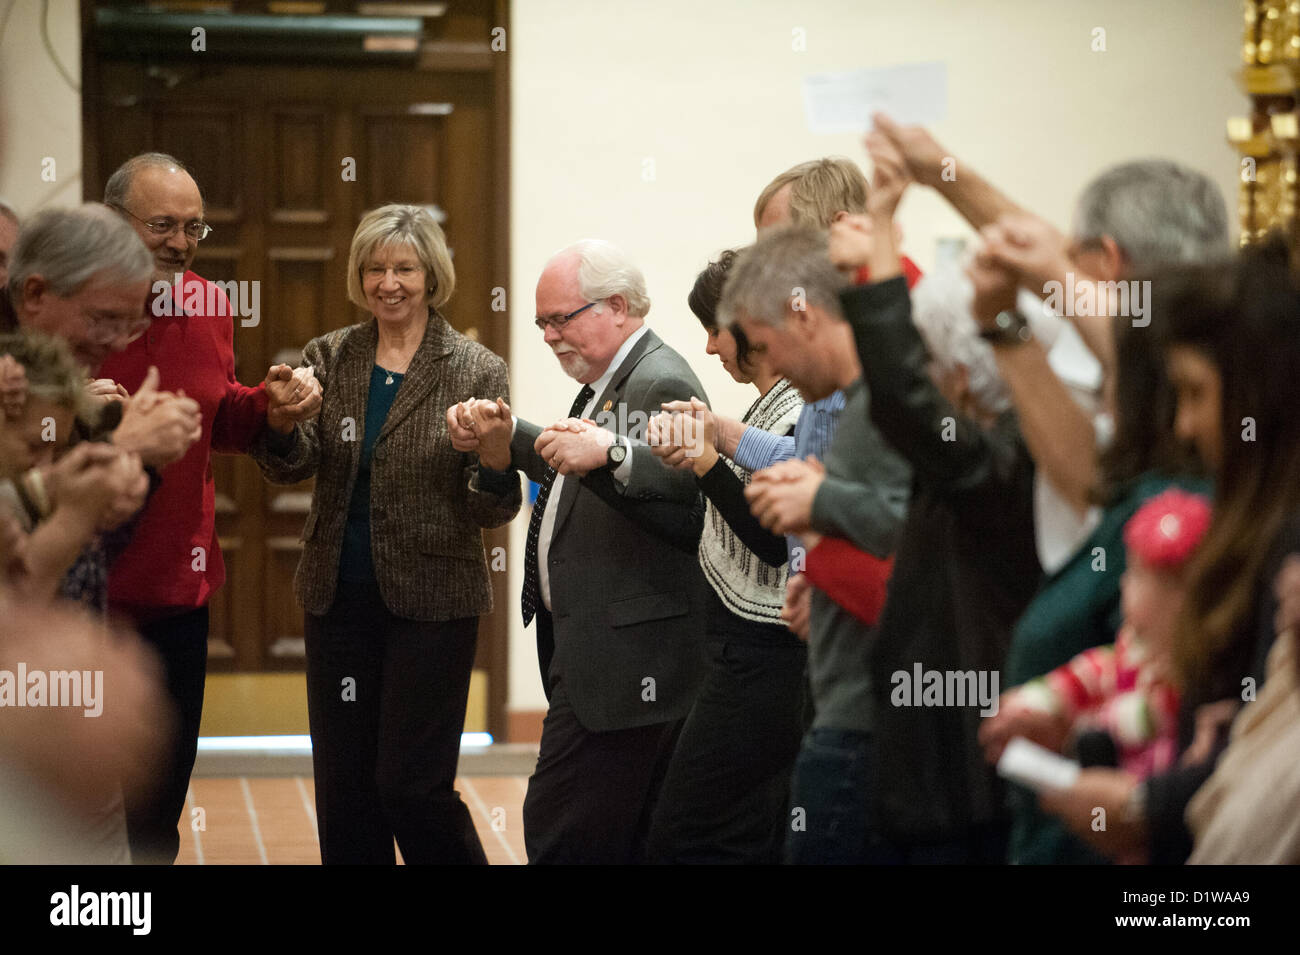 Jan. 6, 2013 - Tucson, Arizona, U.S - PAM SIMON, a former staffer for G. Giffords and Jan. 8 shooting victim, left, dances with Rep. RON BARBER (D-Ariz.) in a Tucson, Ariz. cathedral during an interfaith service commemorating the second anniversary of the 2011 shooting that killed six and wounded 13 others. (Credit Image: © Will Seberger/ZUMAPRESS.com) Stock Photo